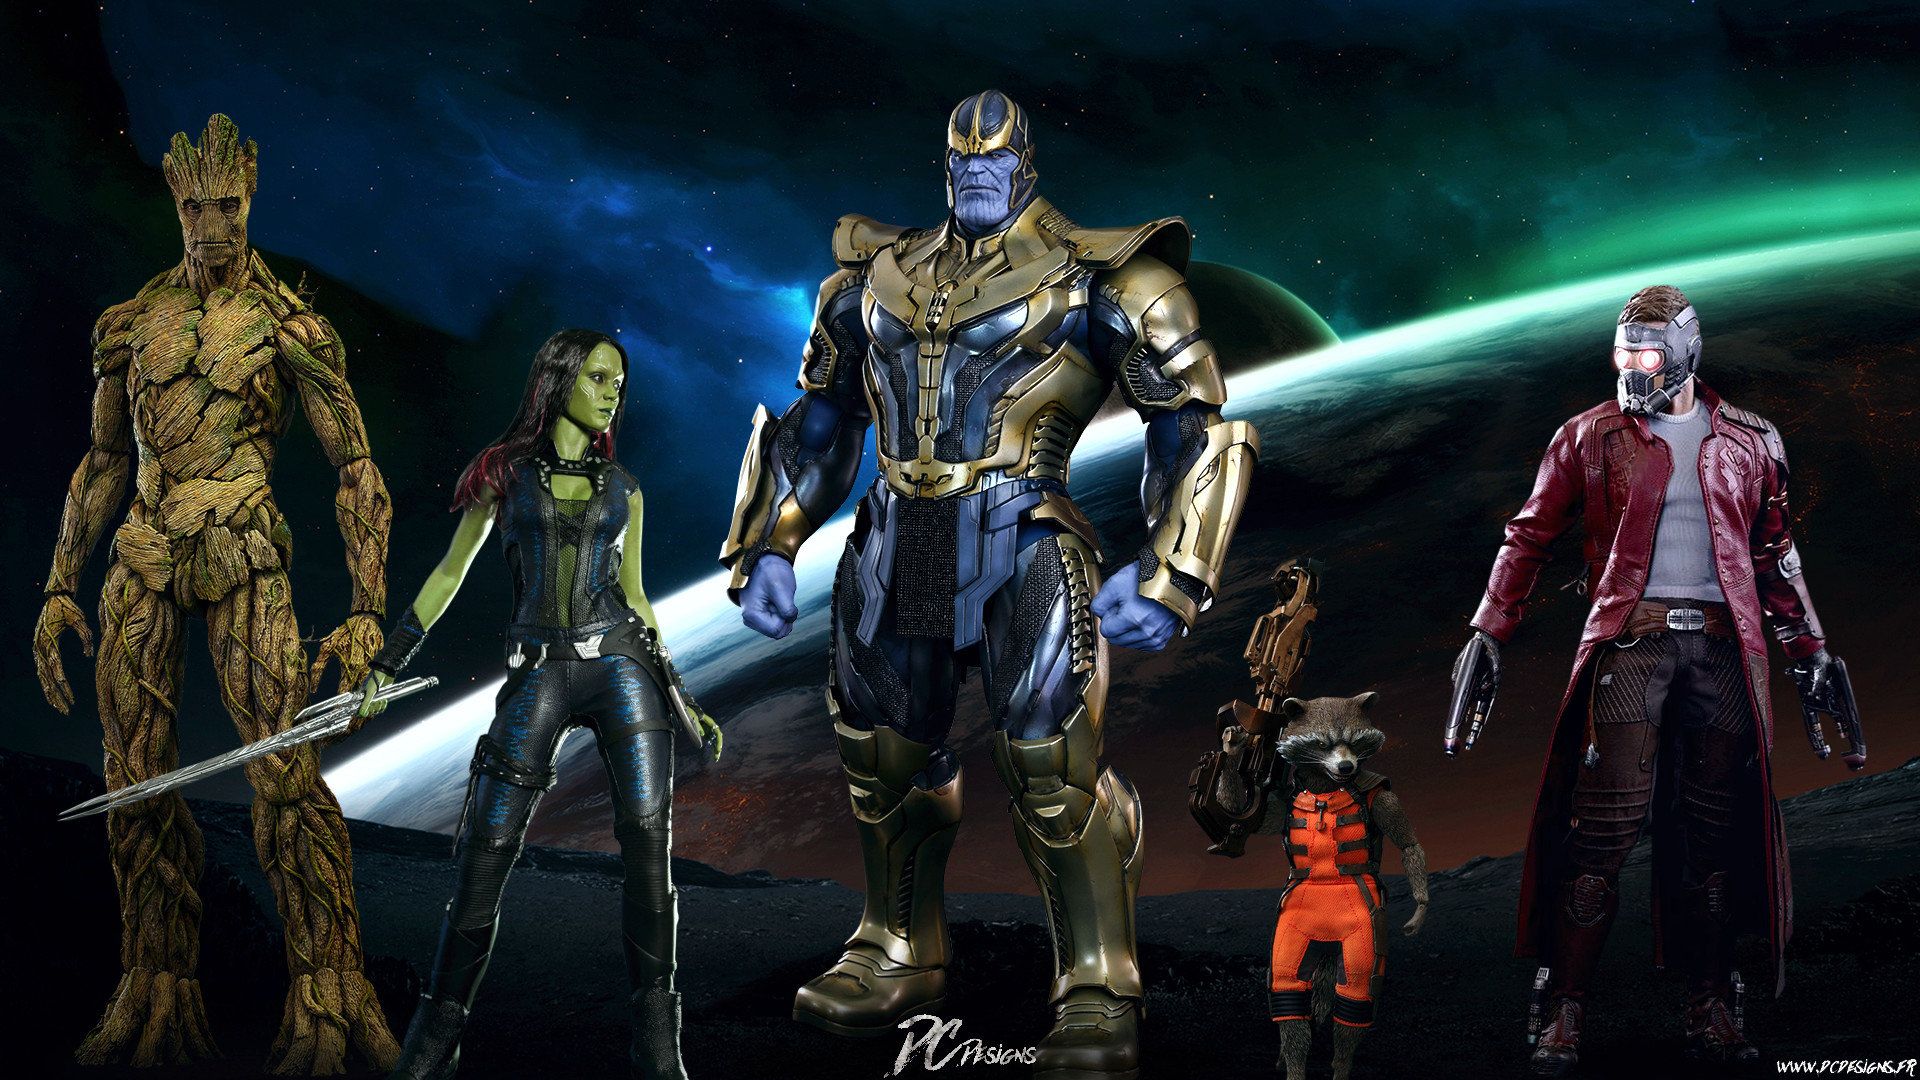 Free Guardians Of The Galaxy High Quality Wallpaper - Fondos De Pantalla Guardians Of The Galaxy - HD Wallpaper 